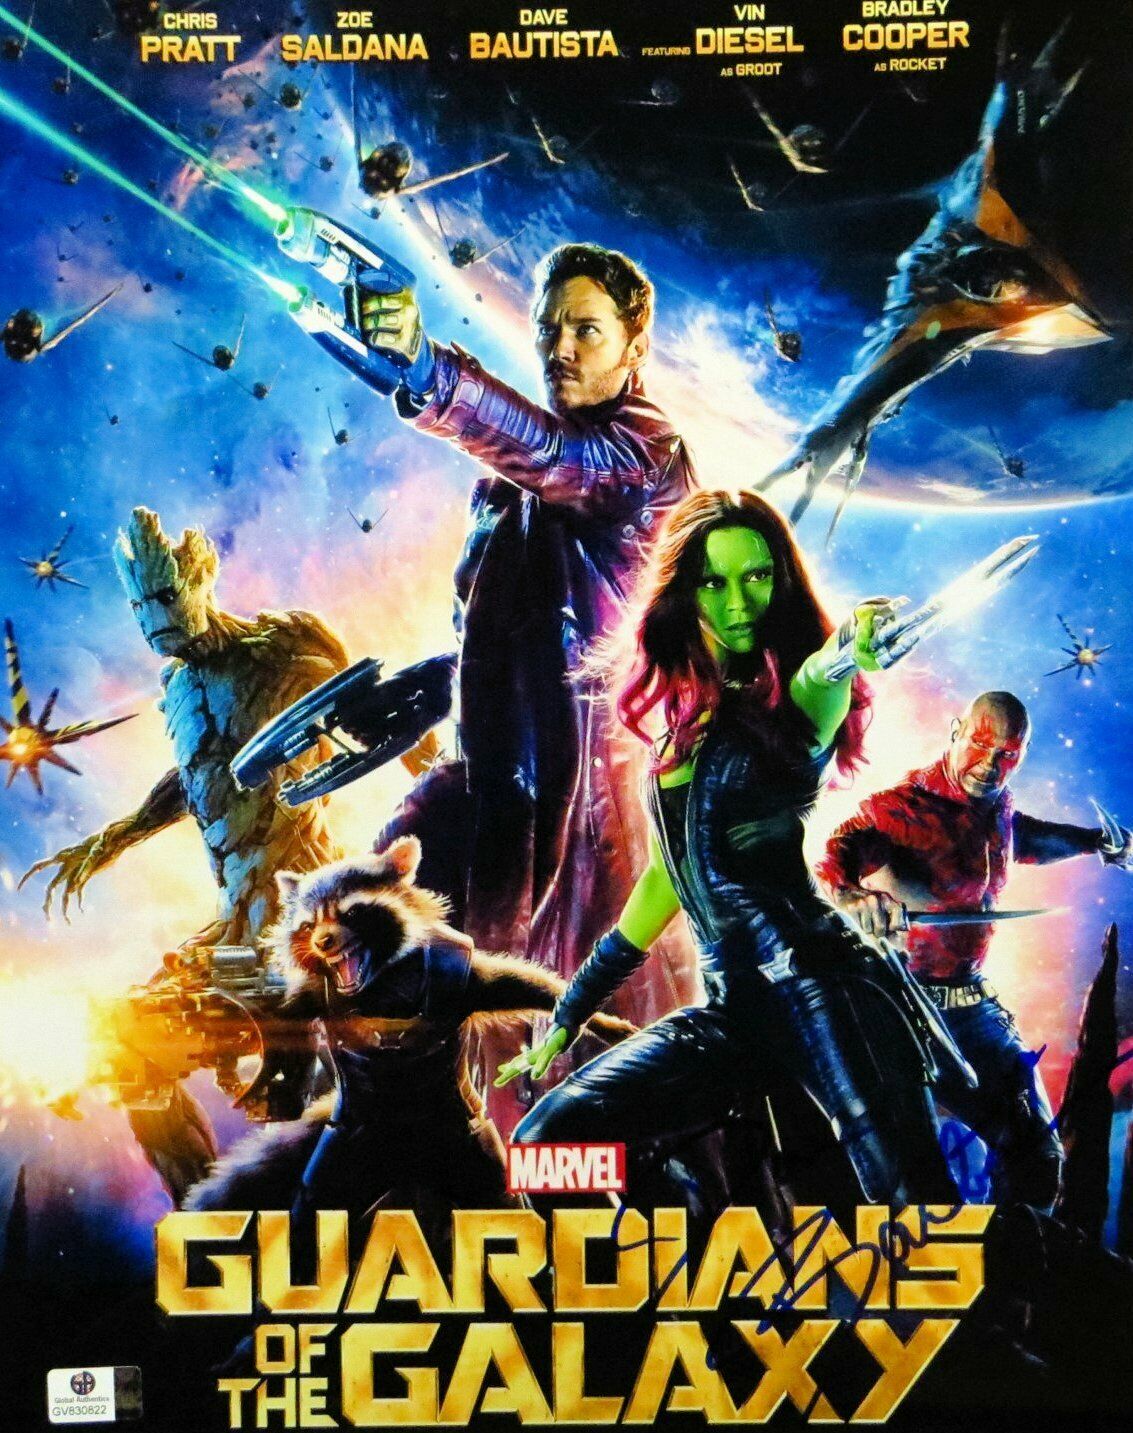 Dave Bautista Signed Autographed 11X14 Photo Poster painting Guardians of the Galaxy GV830822